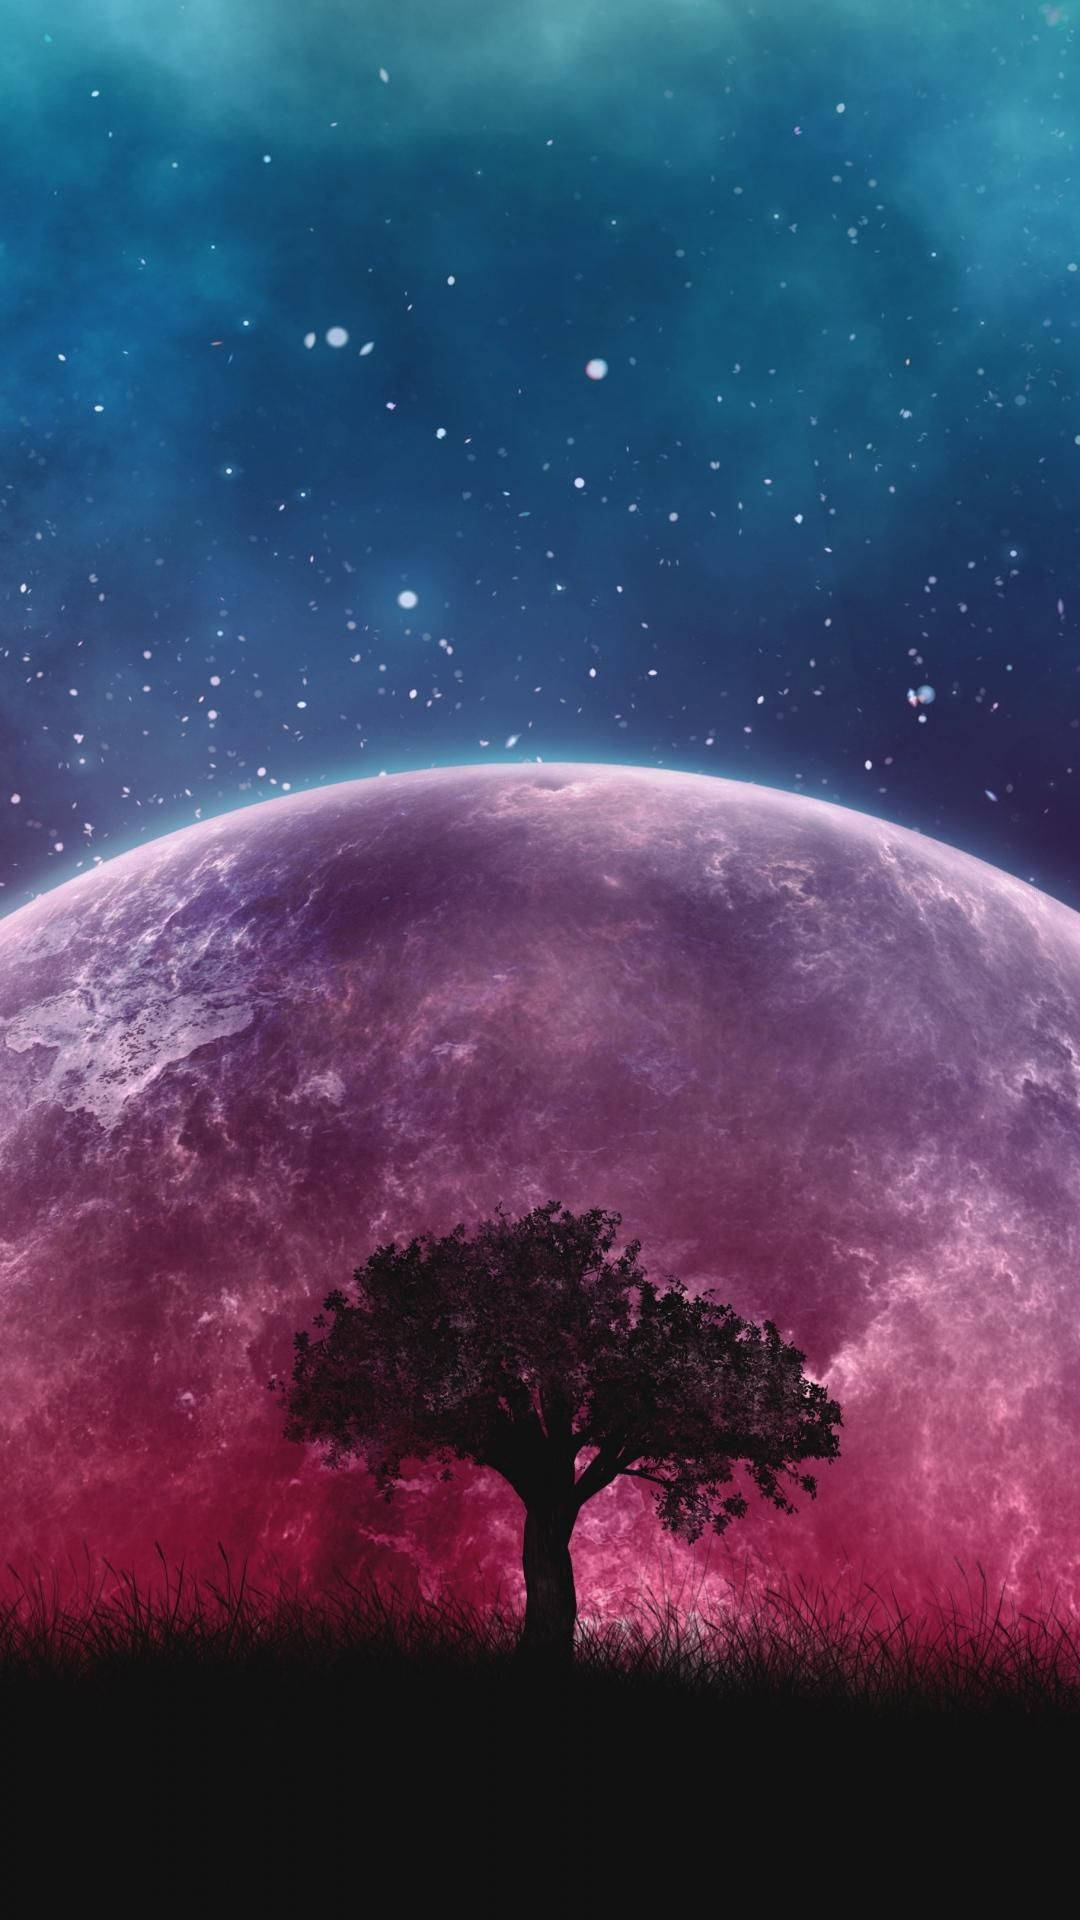 Tree Over A Cute Galaxy Background